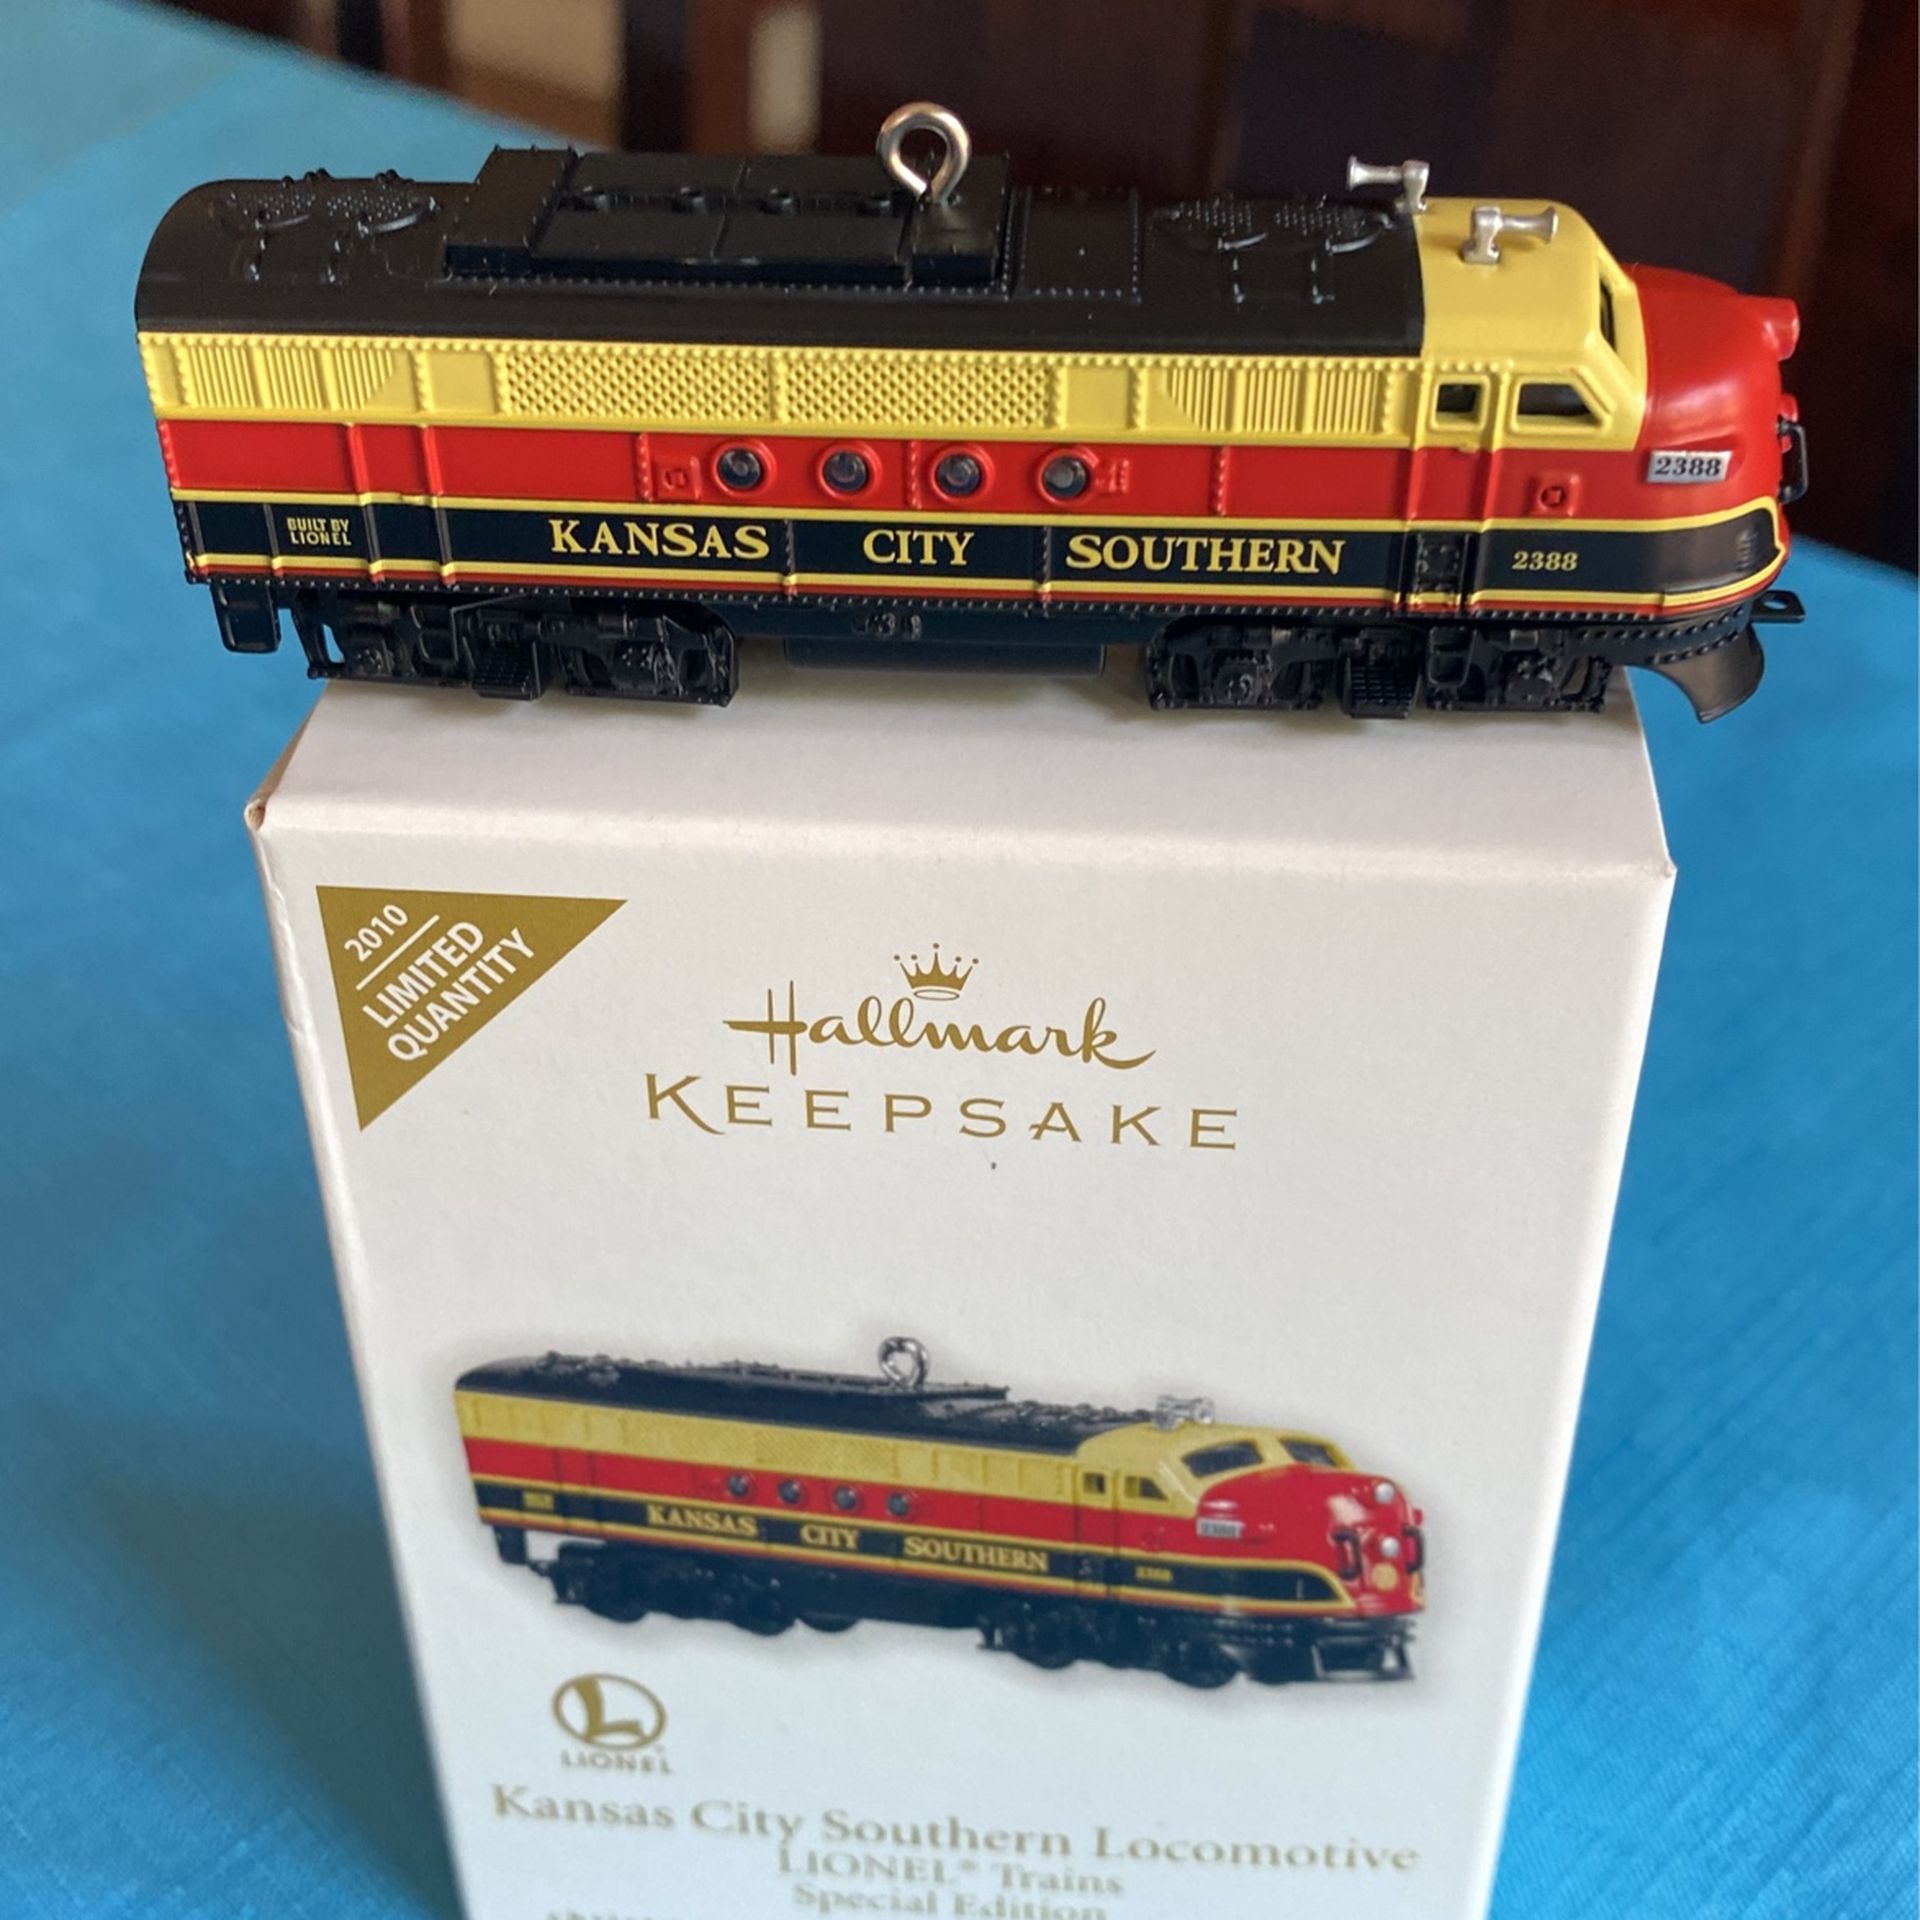 Hallmark keepsake Christmas ornament Kansas City southern locomotive Lionell trains special edition new in the box handcrafted and metal dated 2010